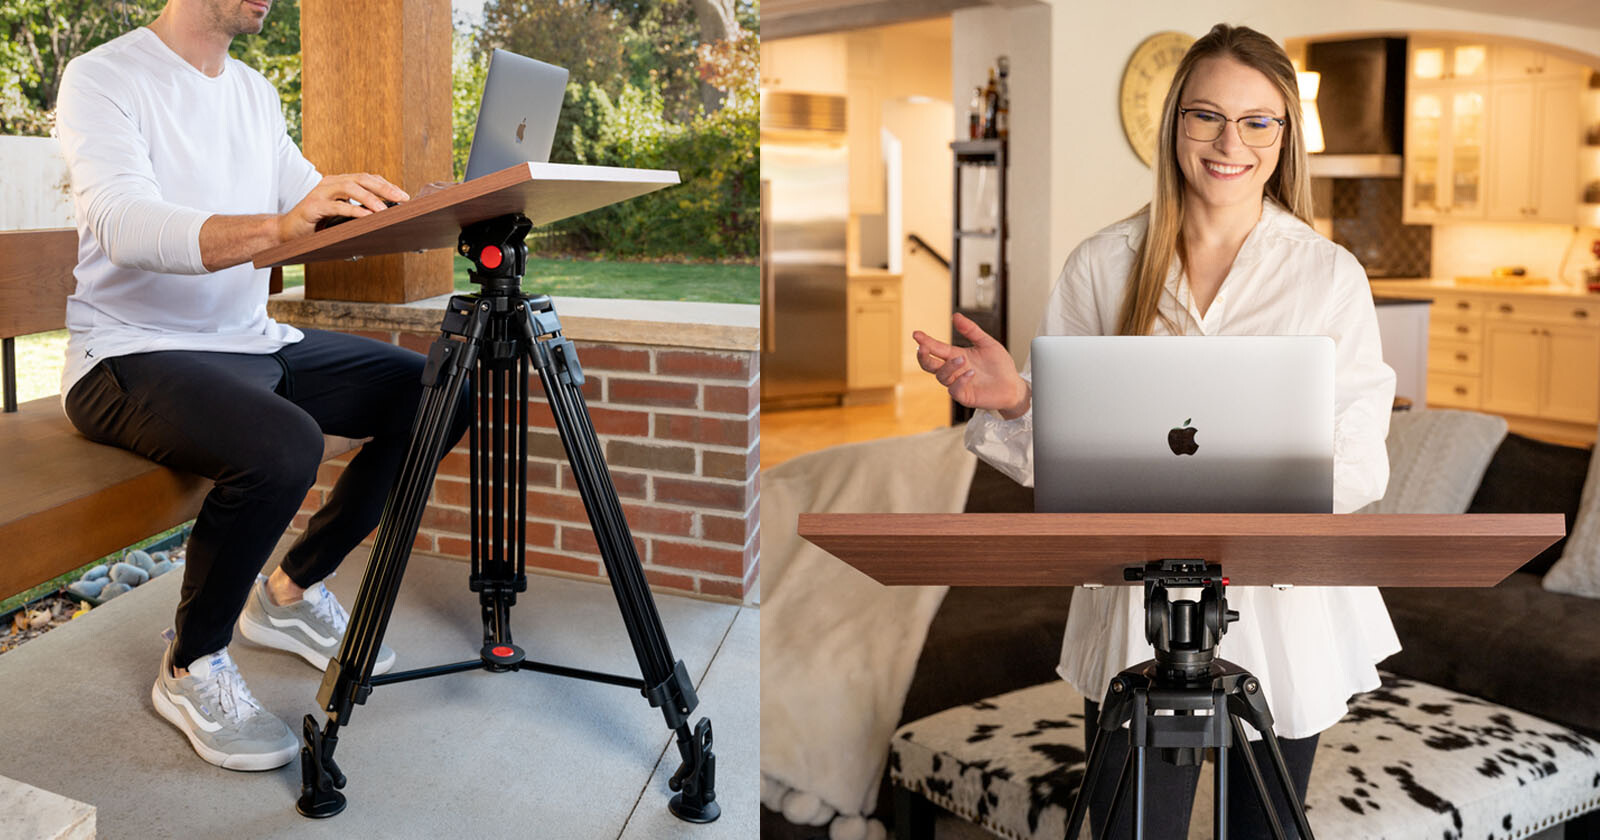 The Tripod Standing Desk Blends Office Equipment and Photography